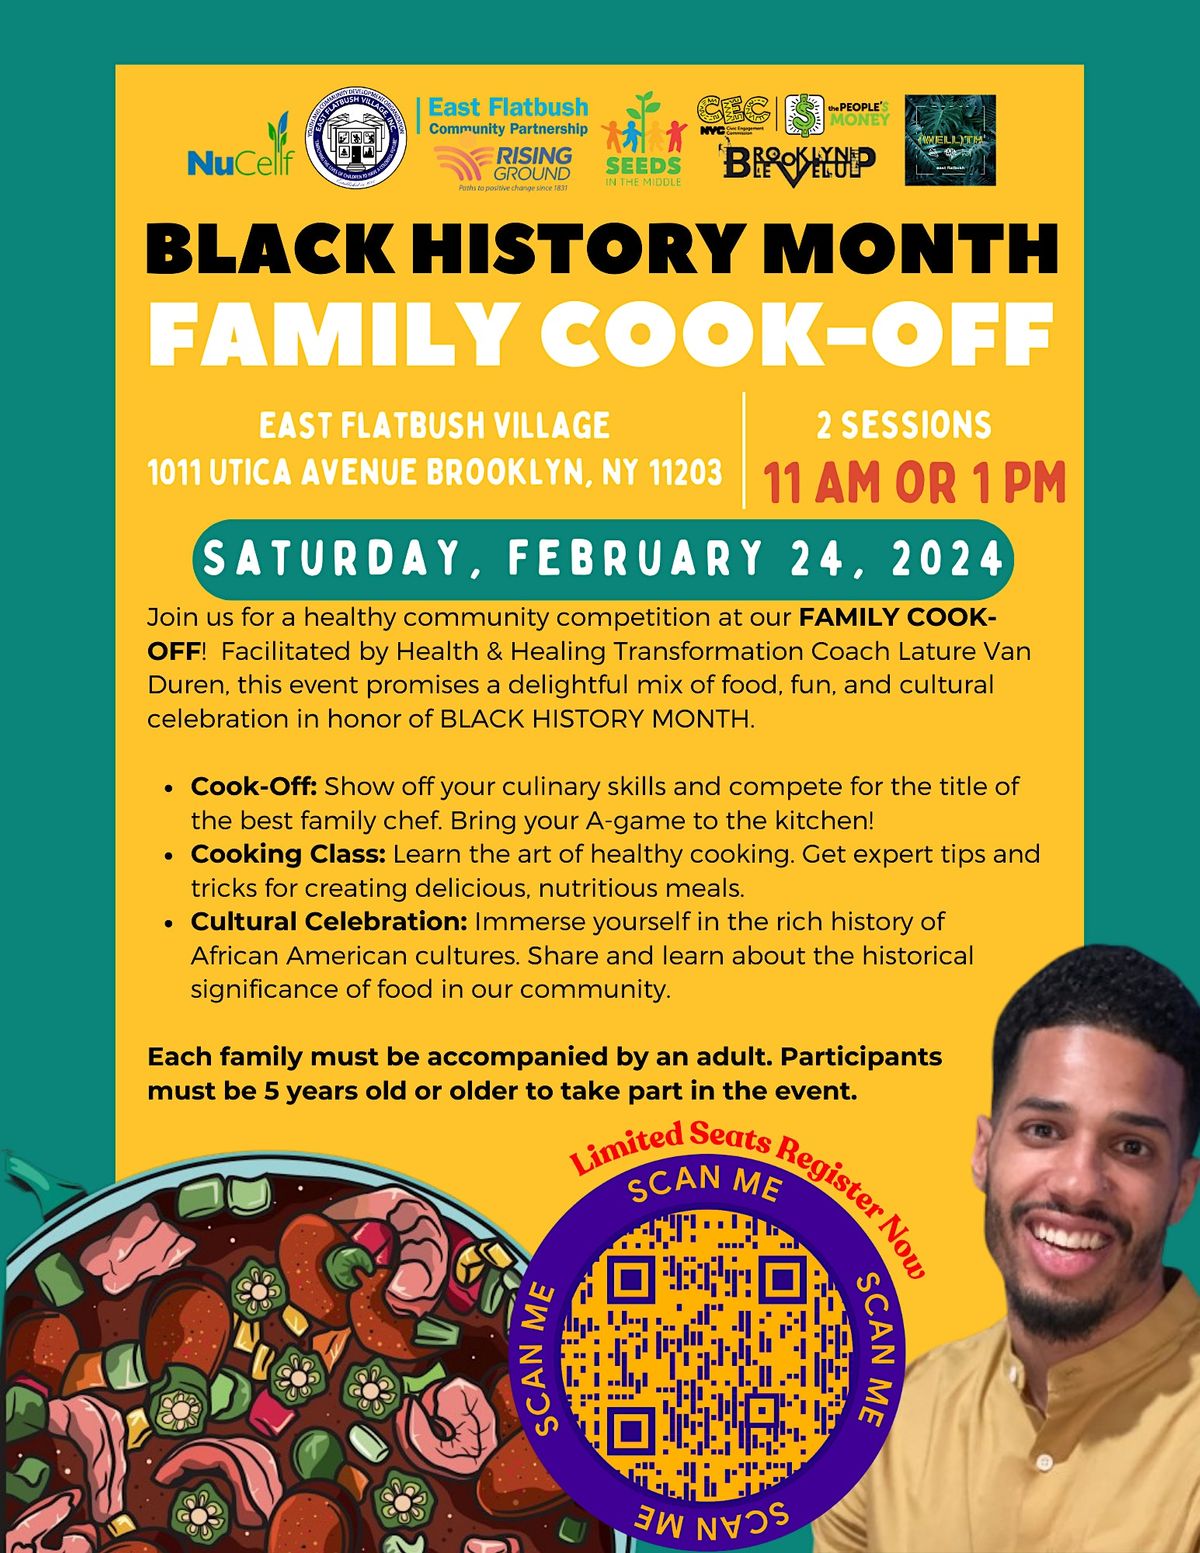 Black History Month Family Cook-Off